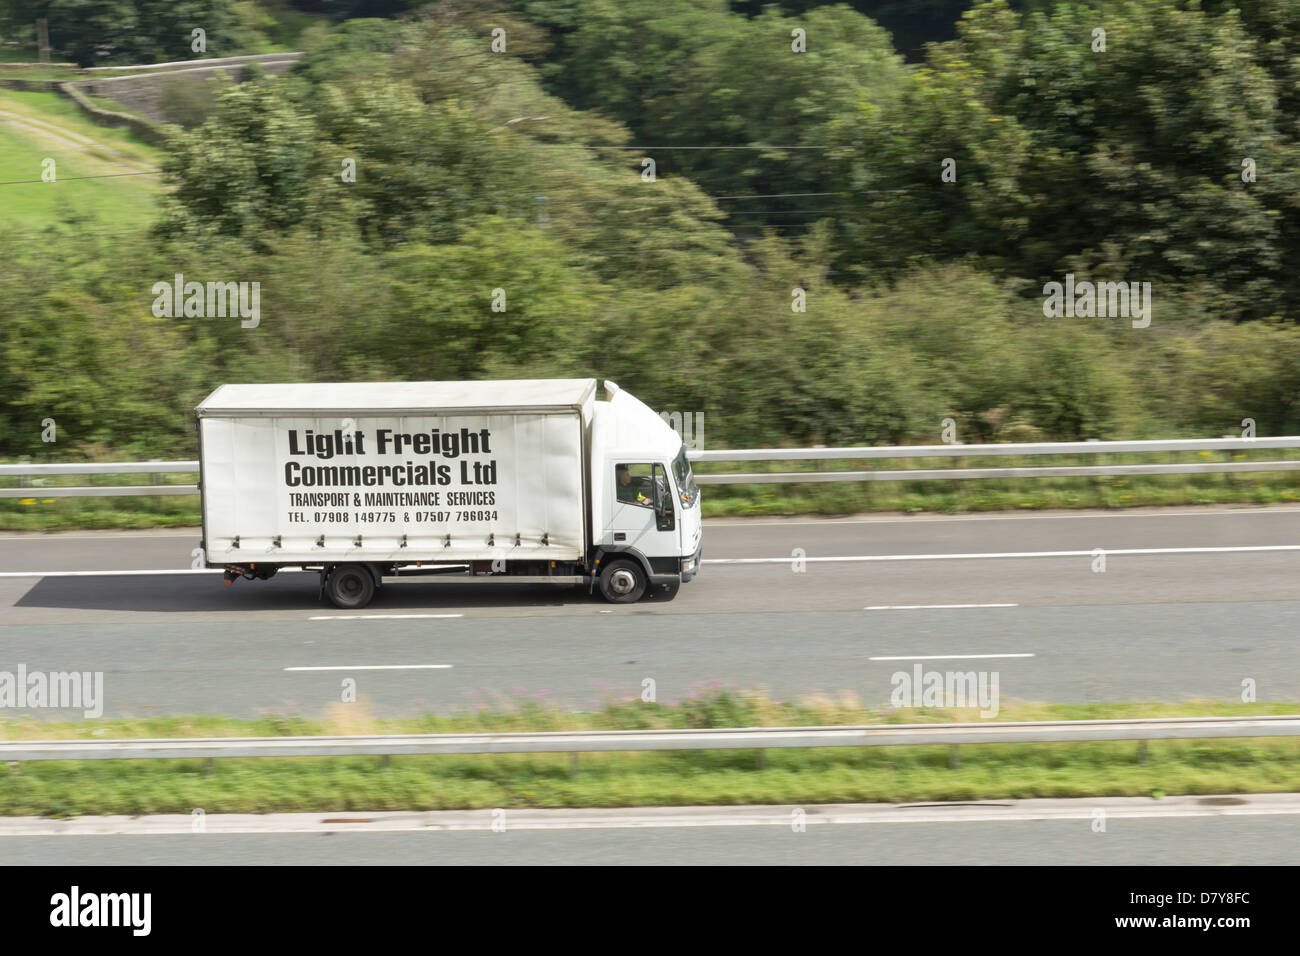 Light Fright Commericals Ltd. curtain sided delivery lorry heading southbound on the M6 motorway near Tebay , Cumbria Stock Photo